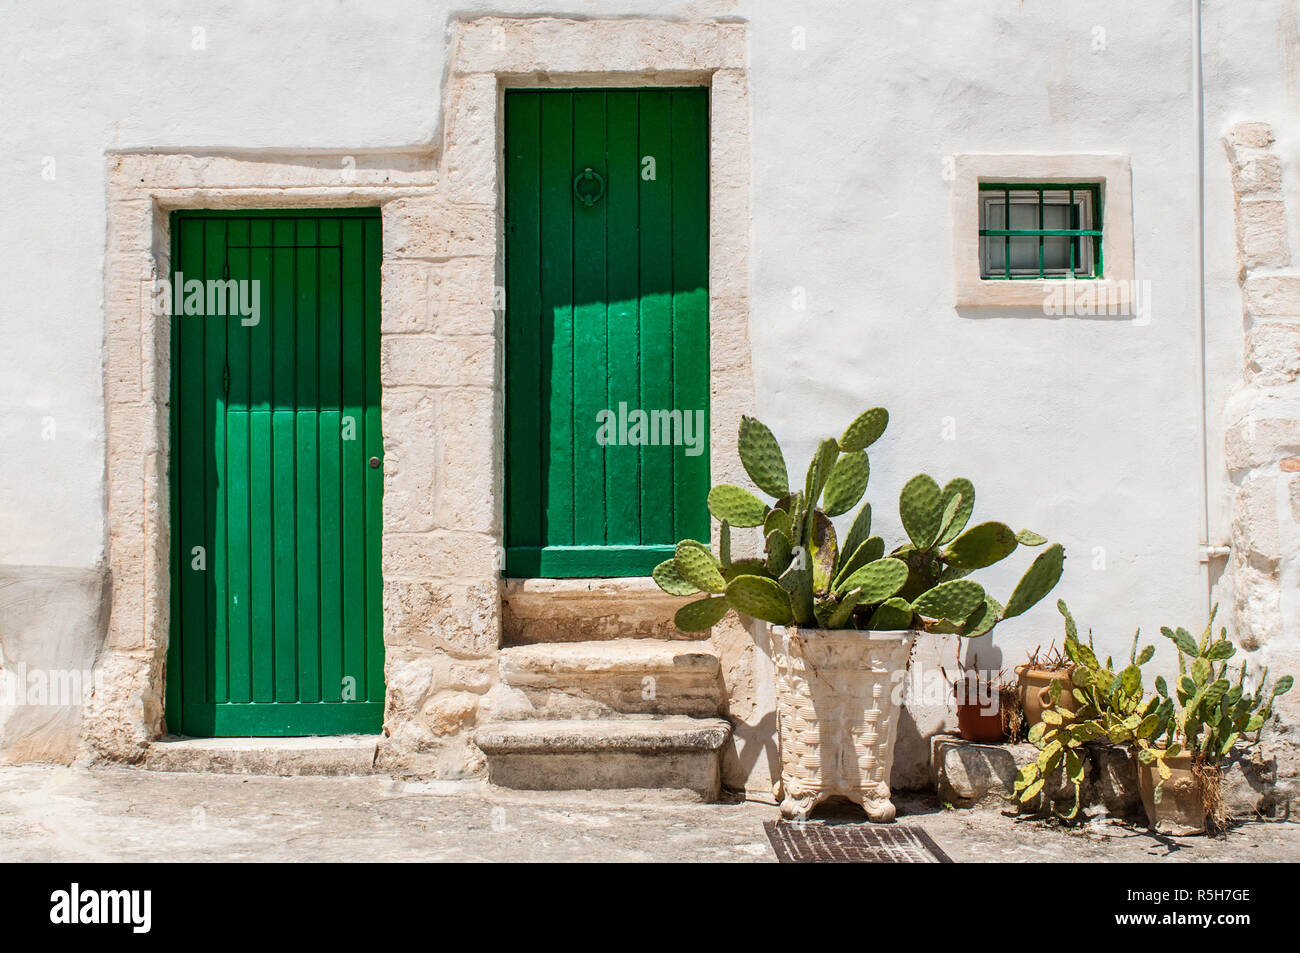 White house wall facade, green door and shutters Stock Photo